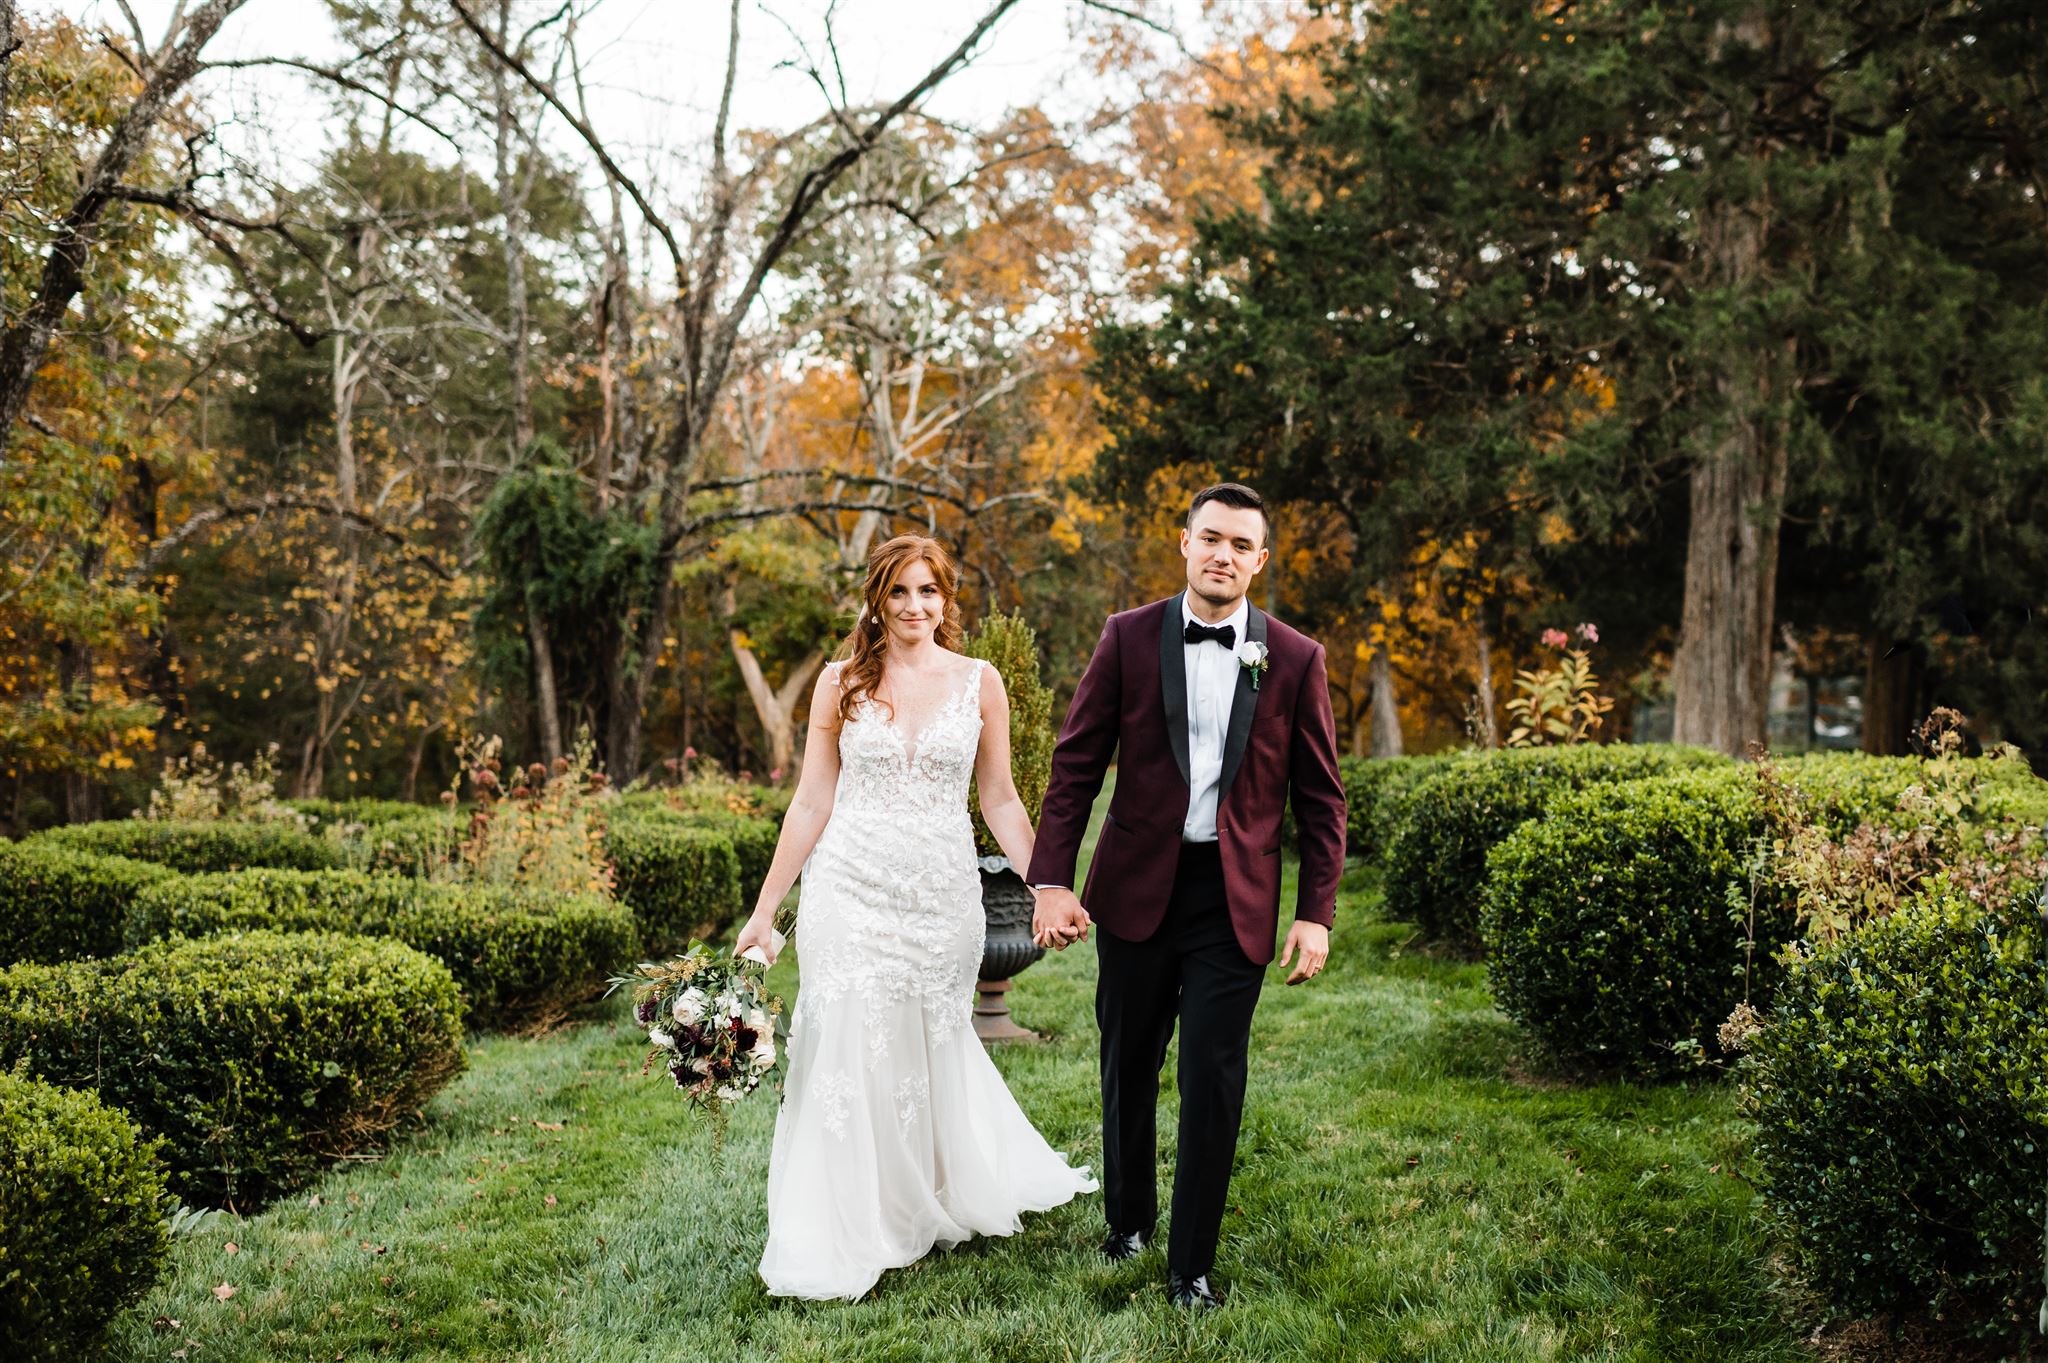 bride and groom holding hands and walking through a garden at their northern virginia wedding venue and smiling captured by northern Virginia wedding photographer